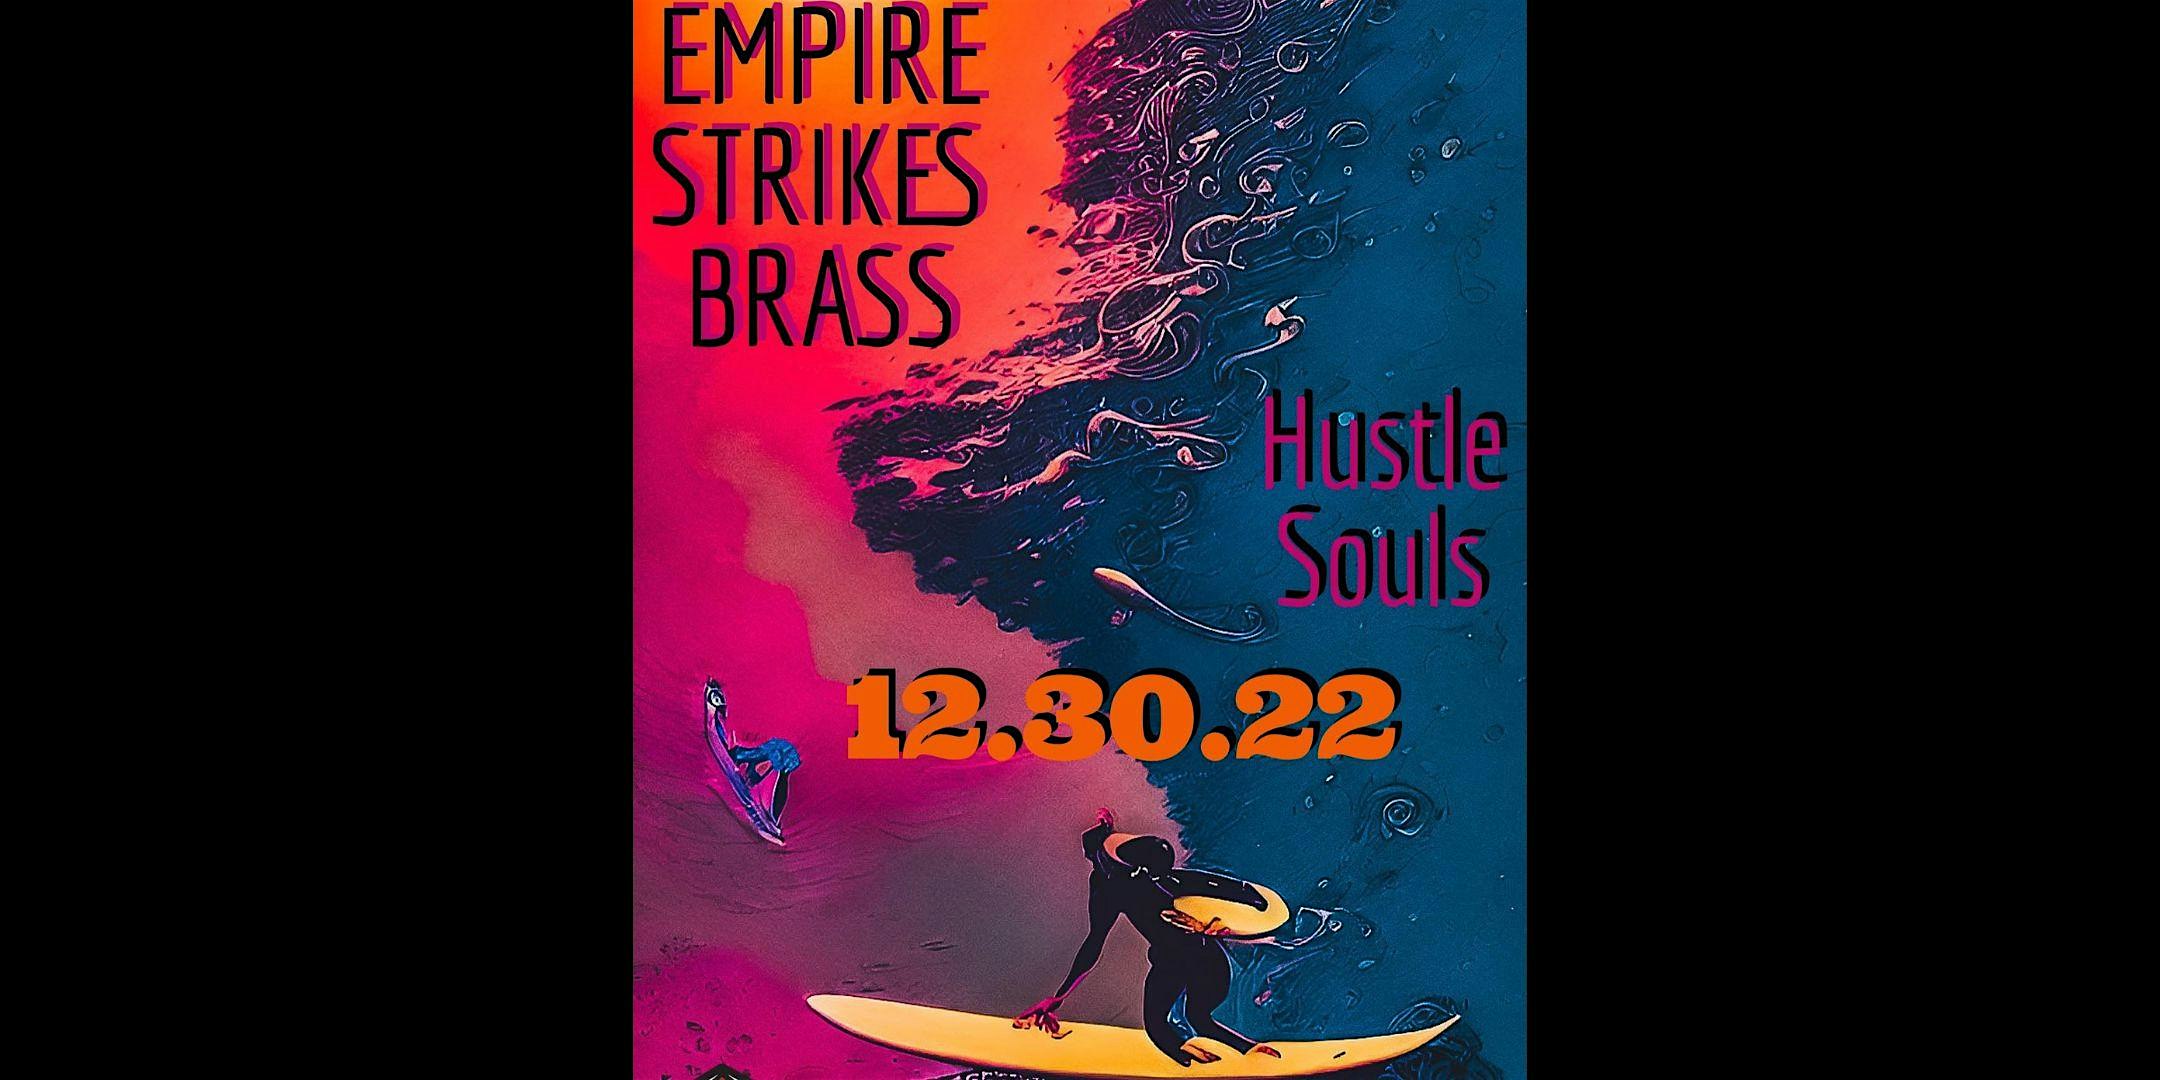 Empire Strikes Brass with Hustle Souls at Asheville Music Hall